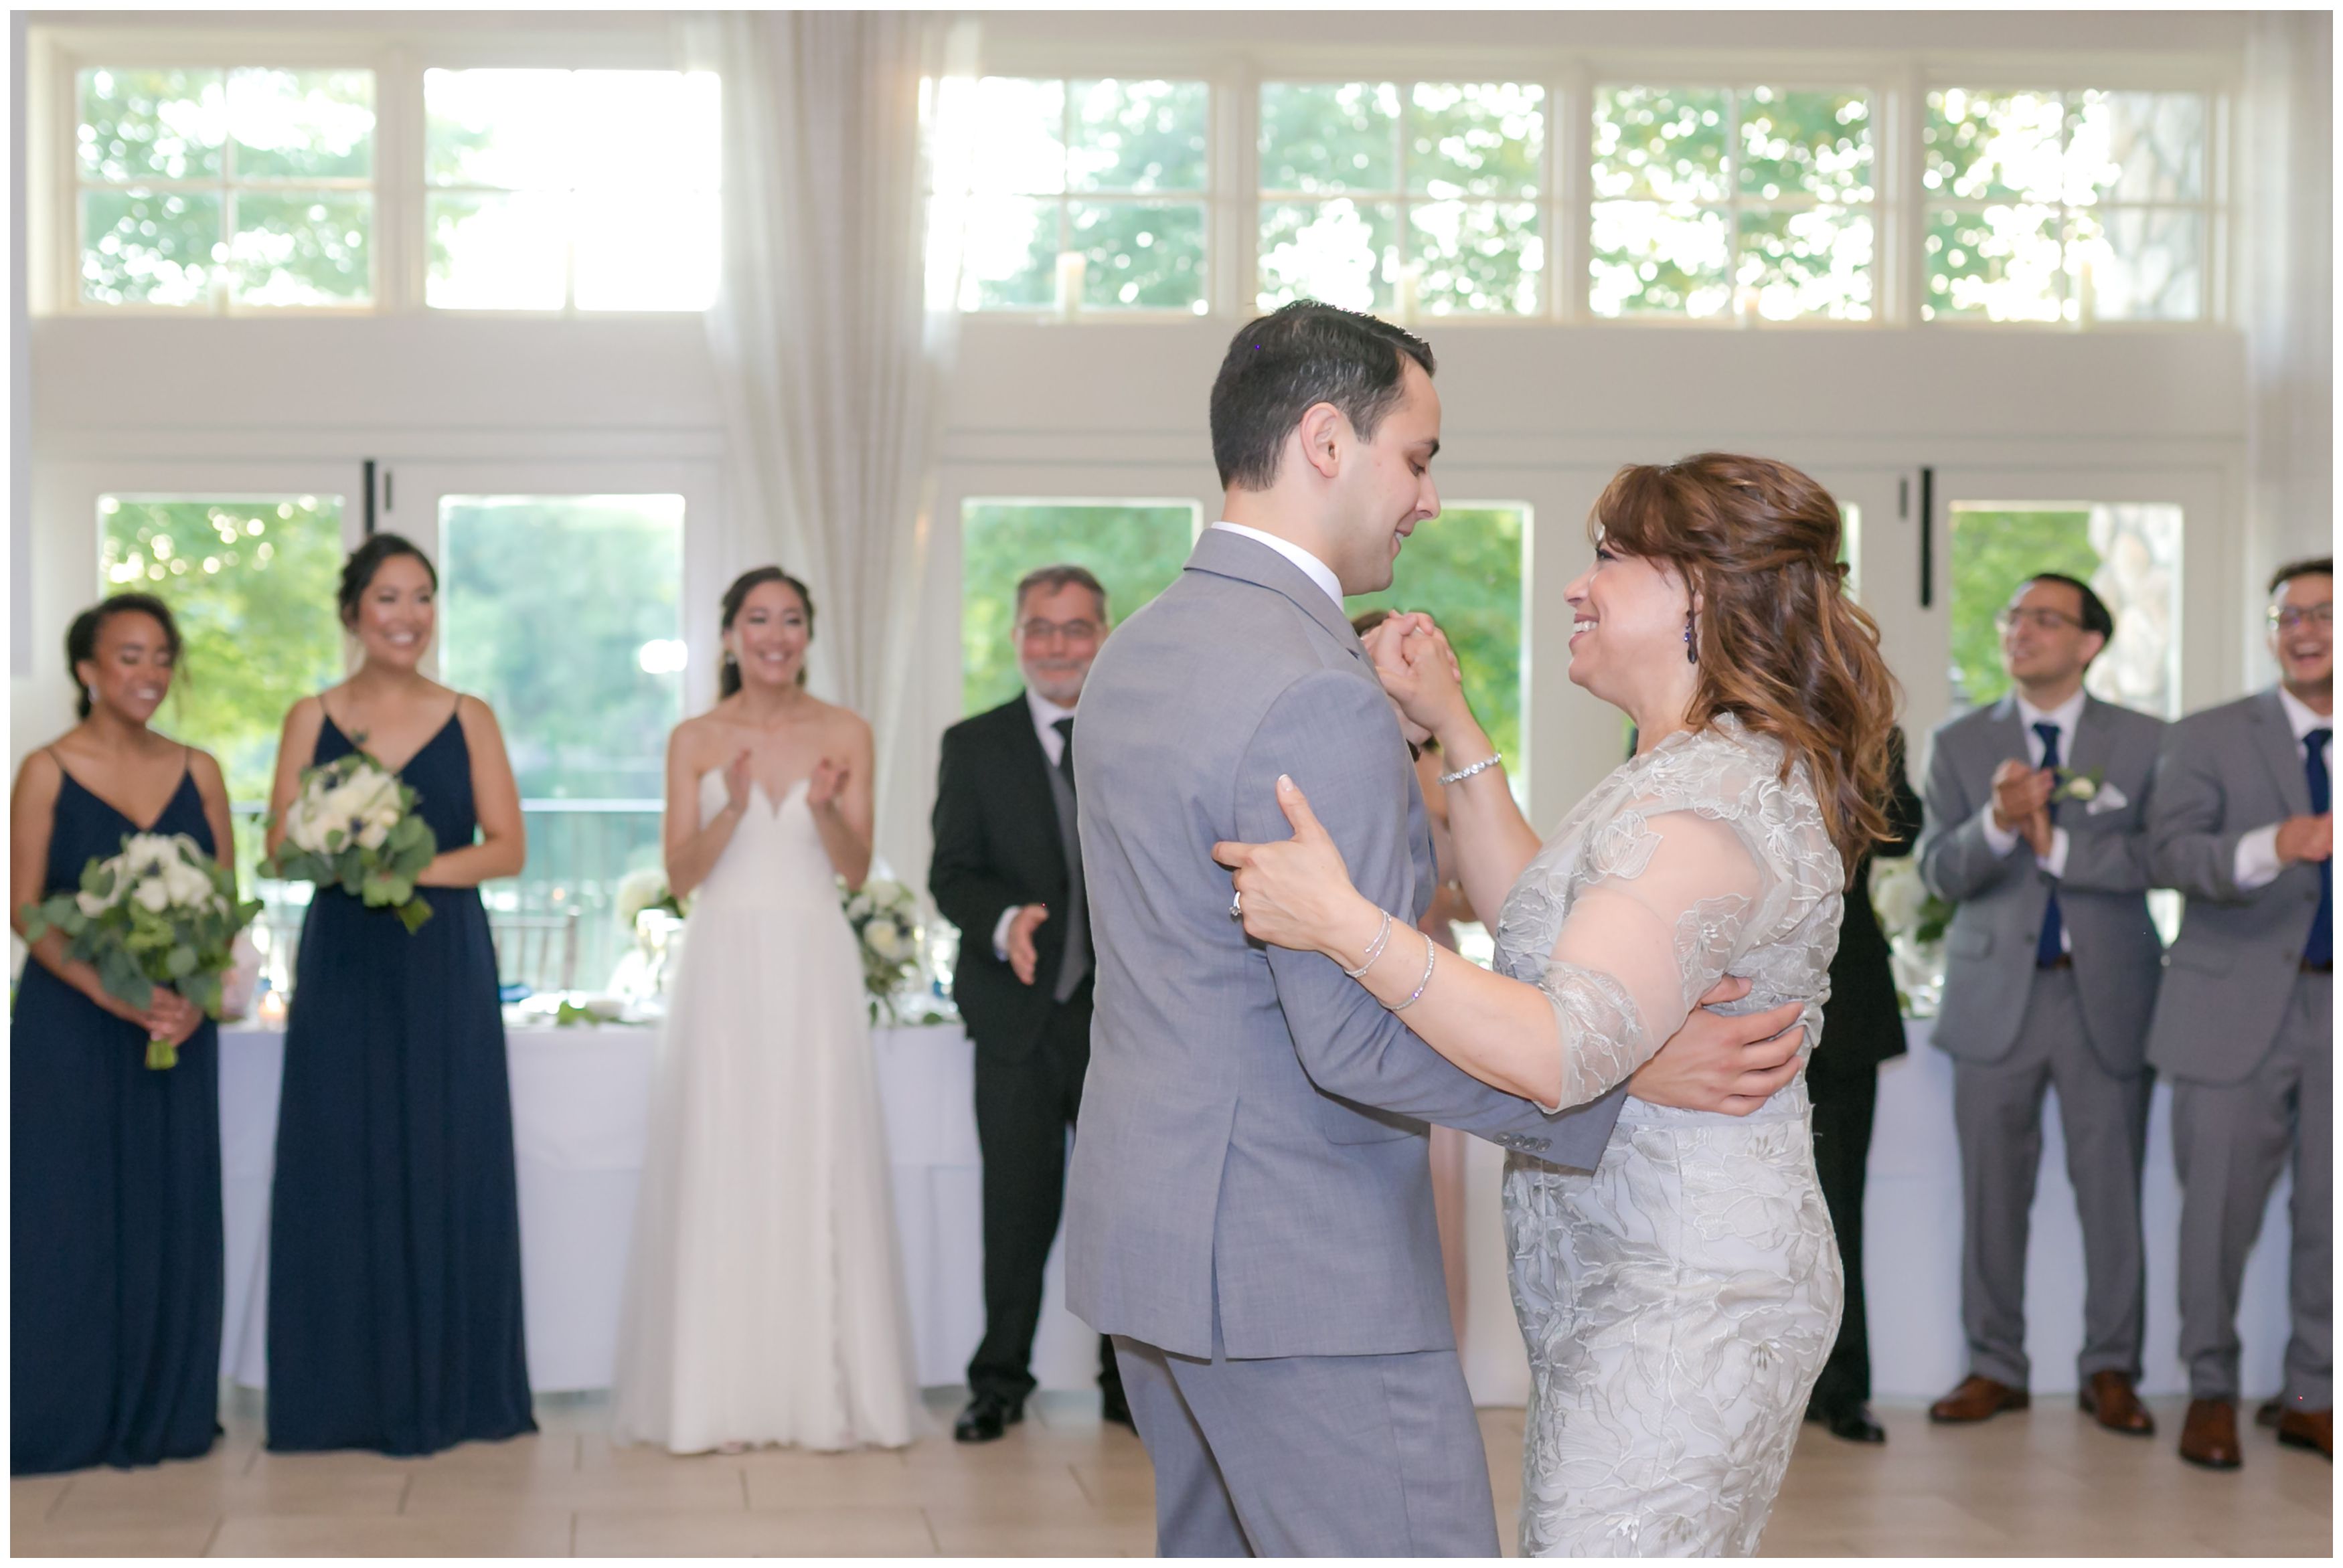 Mother son dance wedding photo at the Indian Trail Club